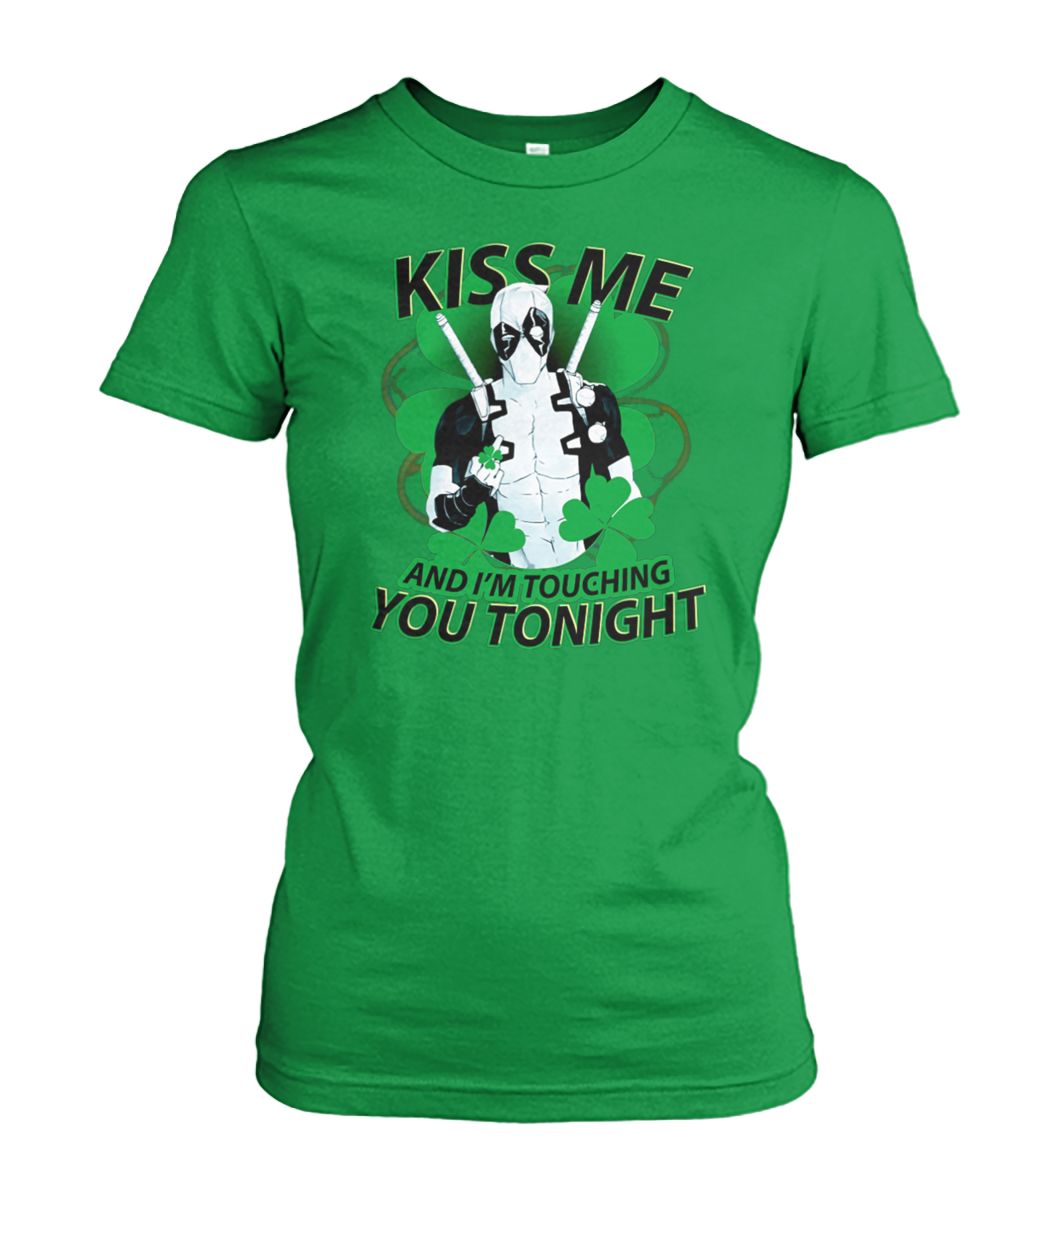 Deadpool kiss me and I'm touching you tonight st patrick's day women's crew tee